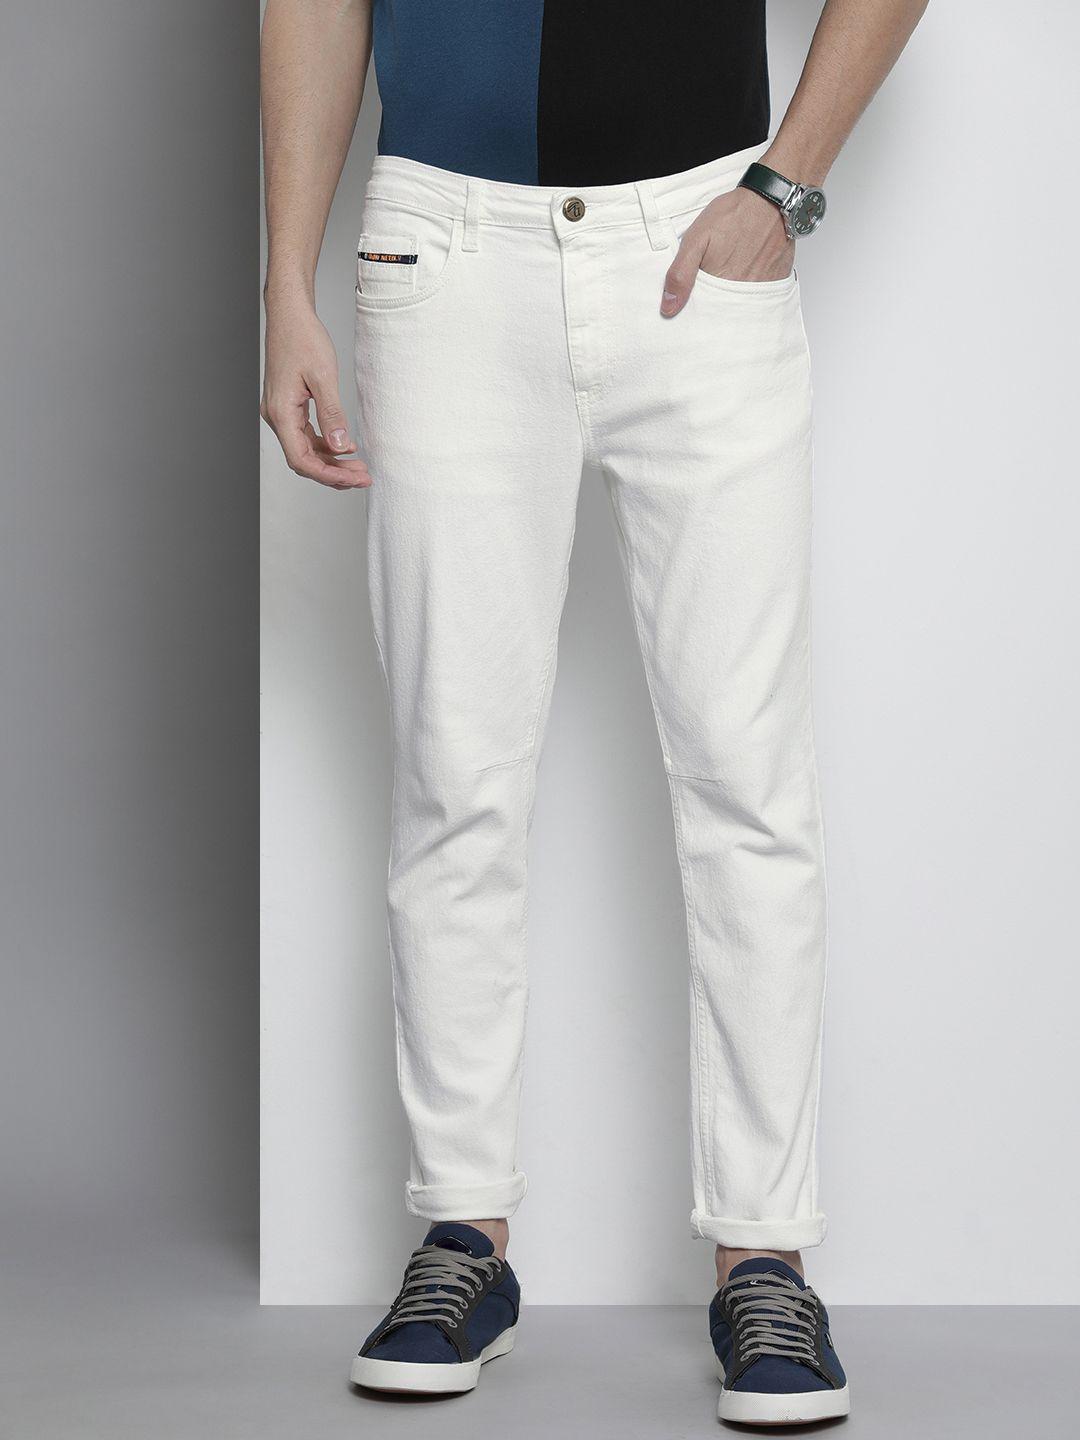 the-indian-garage-co-men-relaxed-fit-light-fade-stretchable-jeans